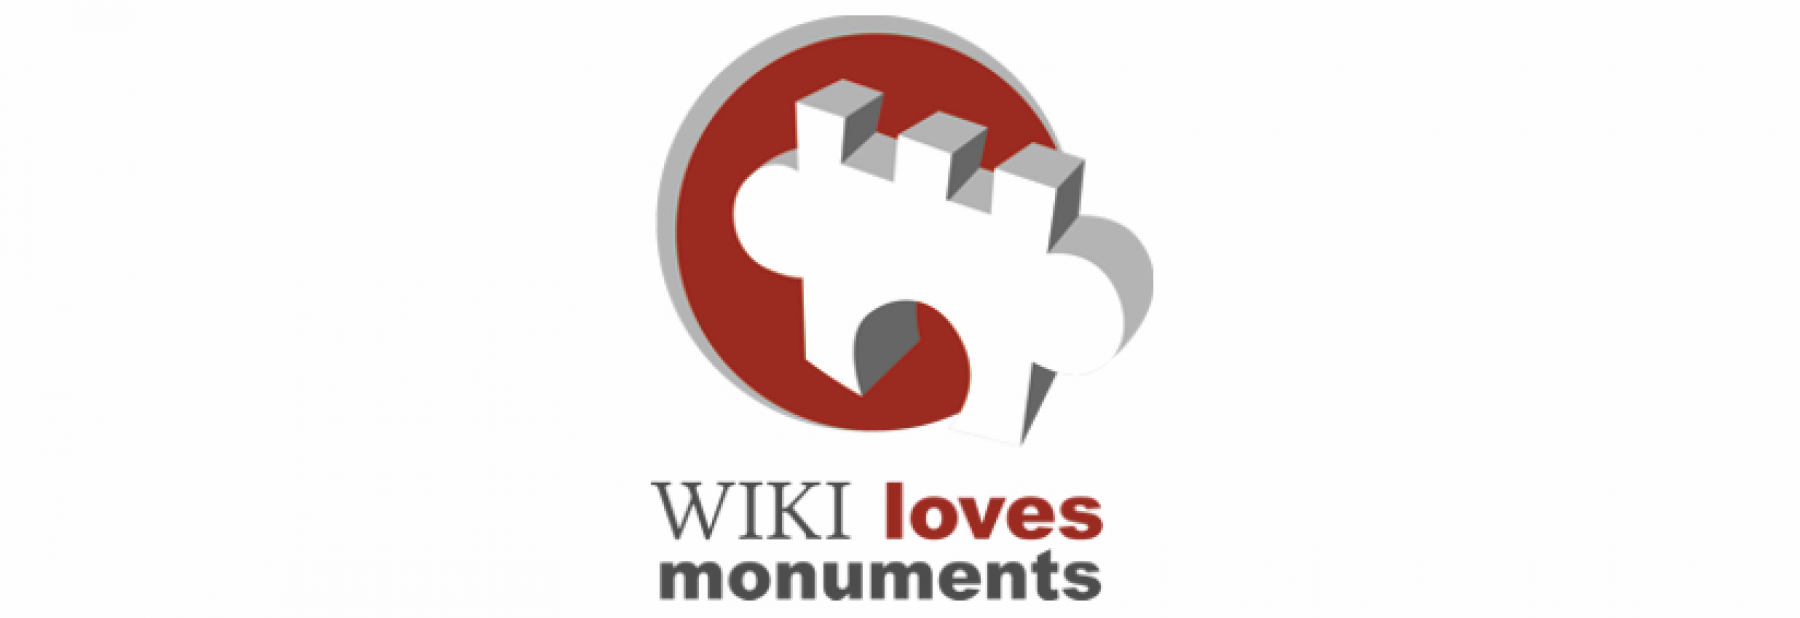 wiki_loves_monuments